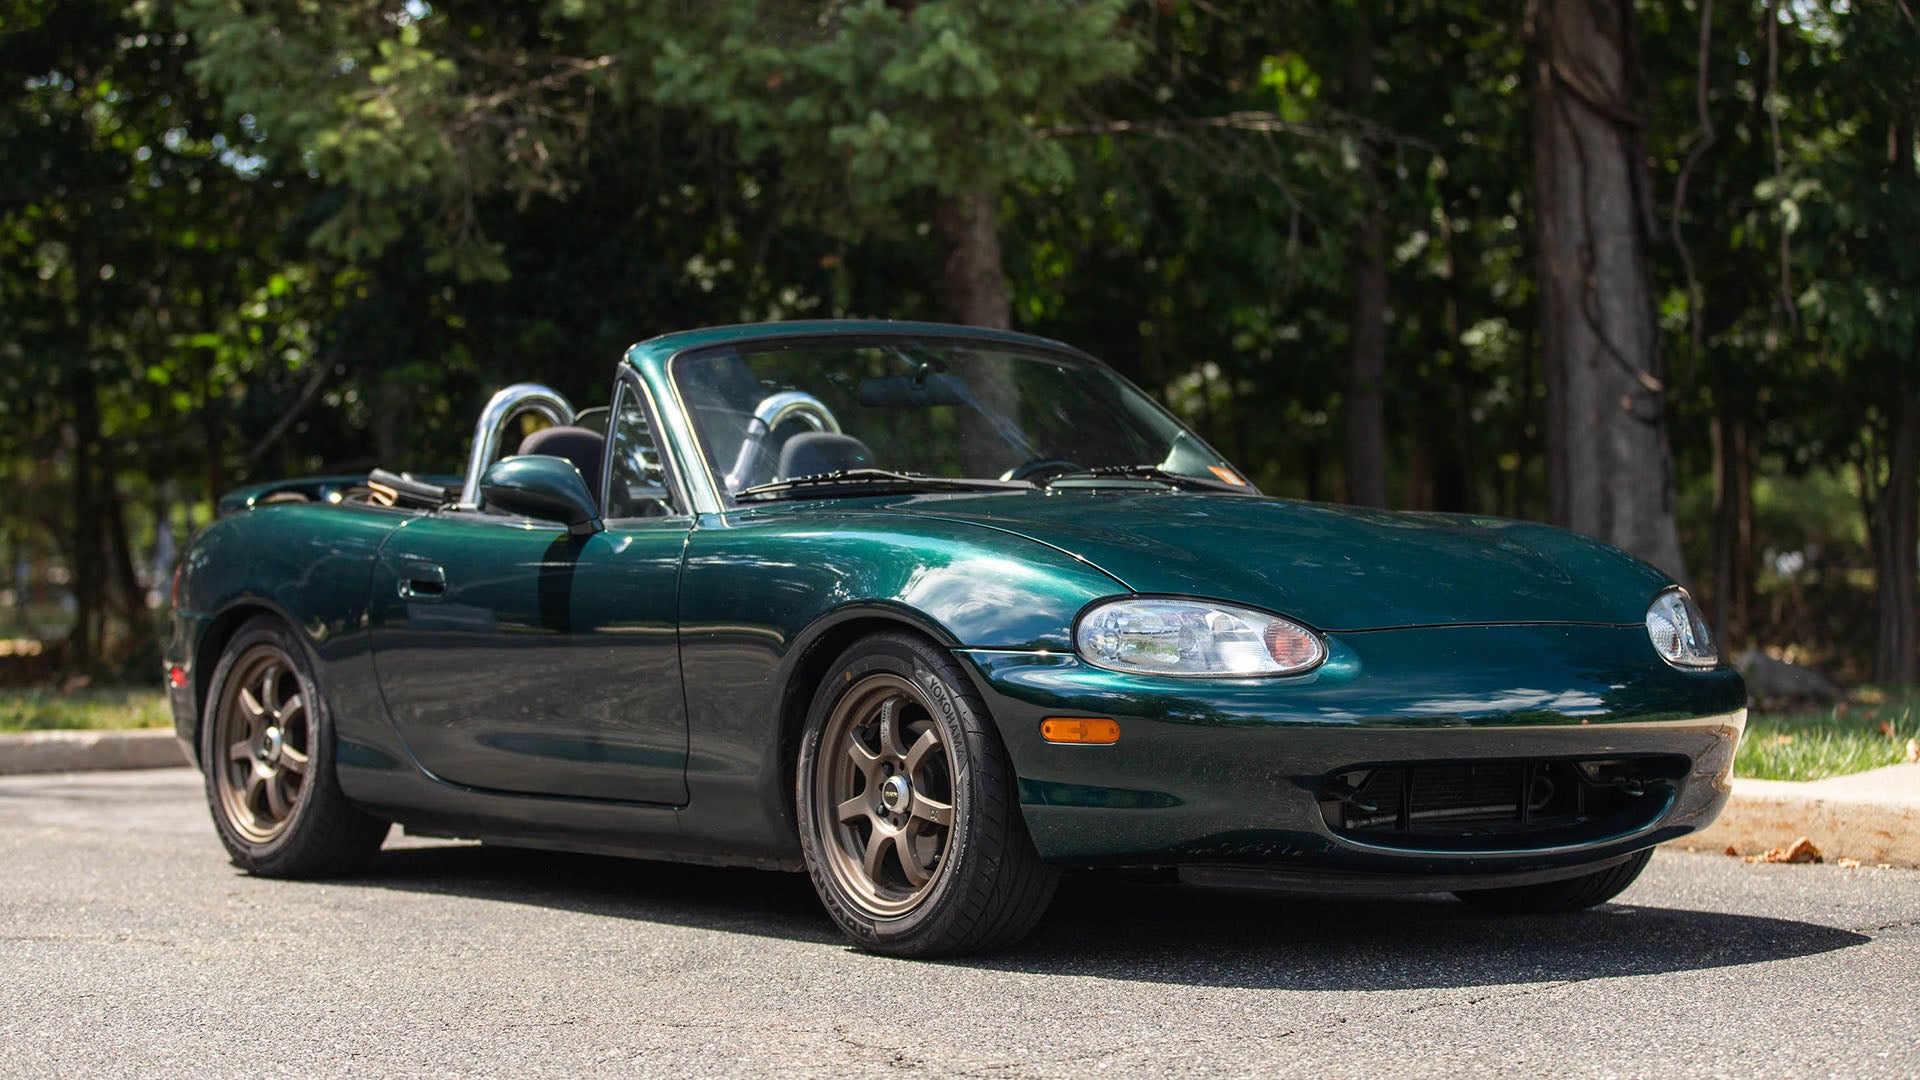 Supercharged 1999 NB Mazda Miata Review: This Is a Miata Done Right